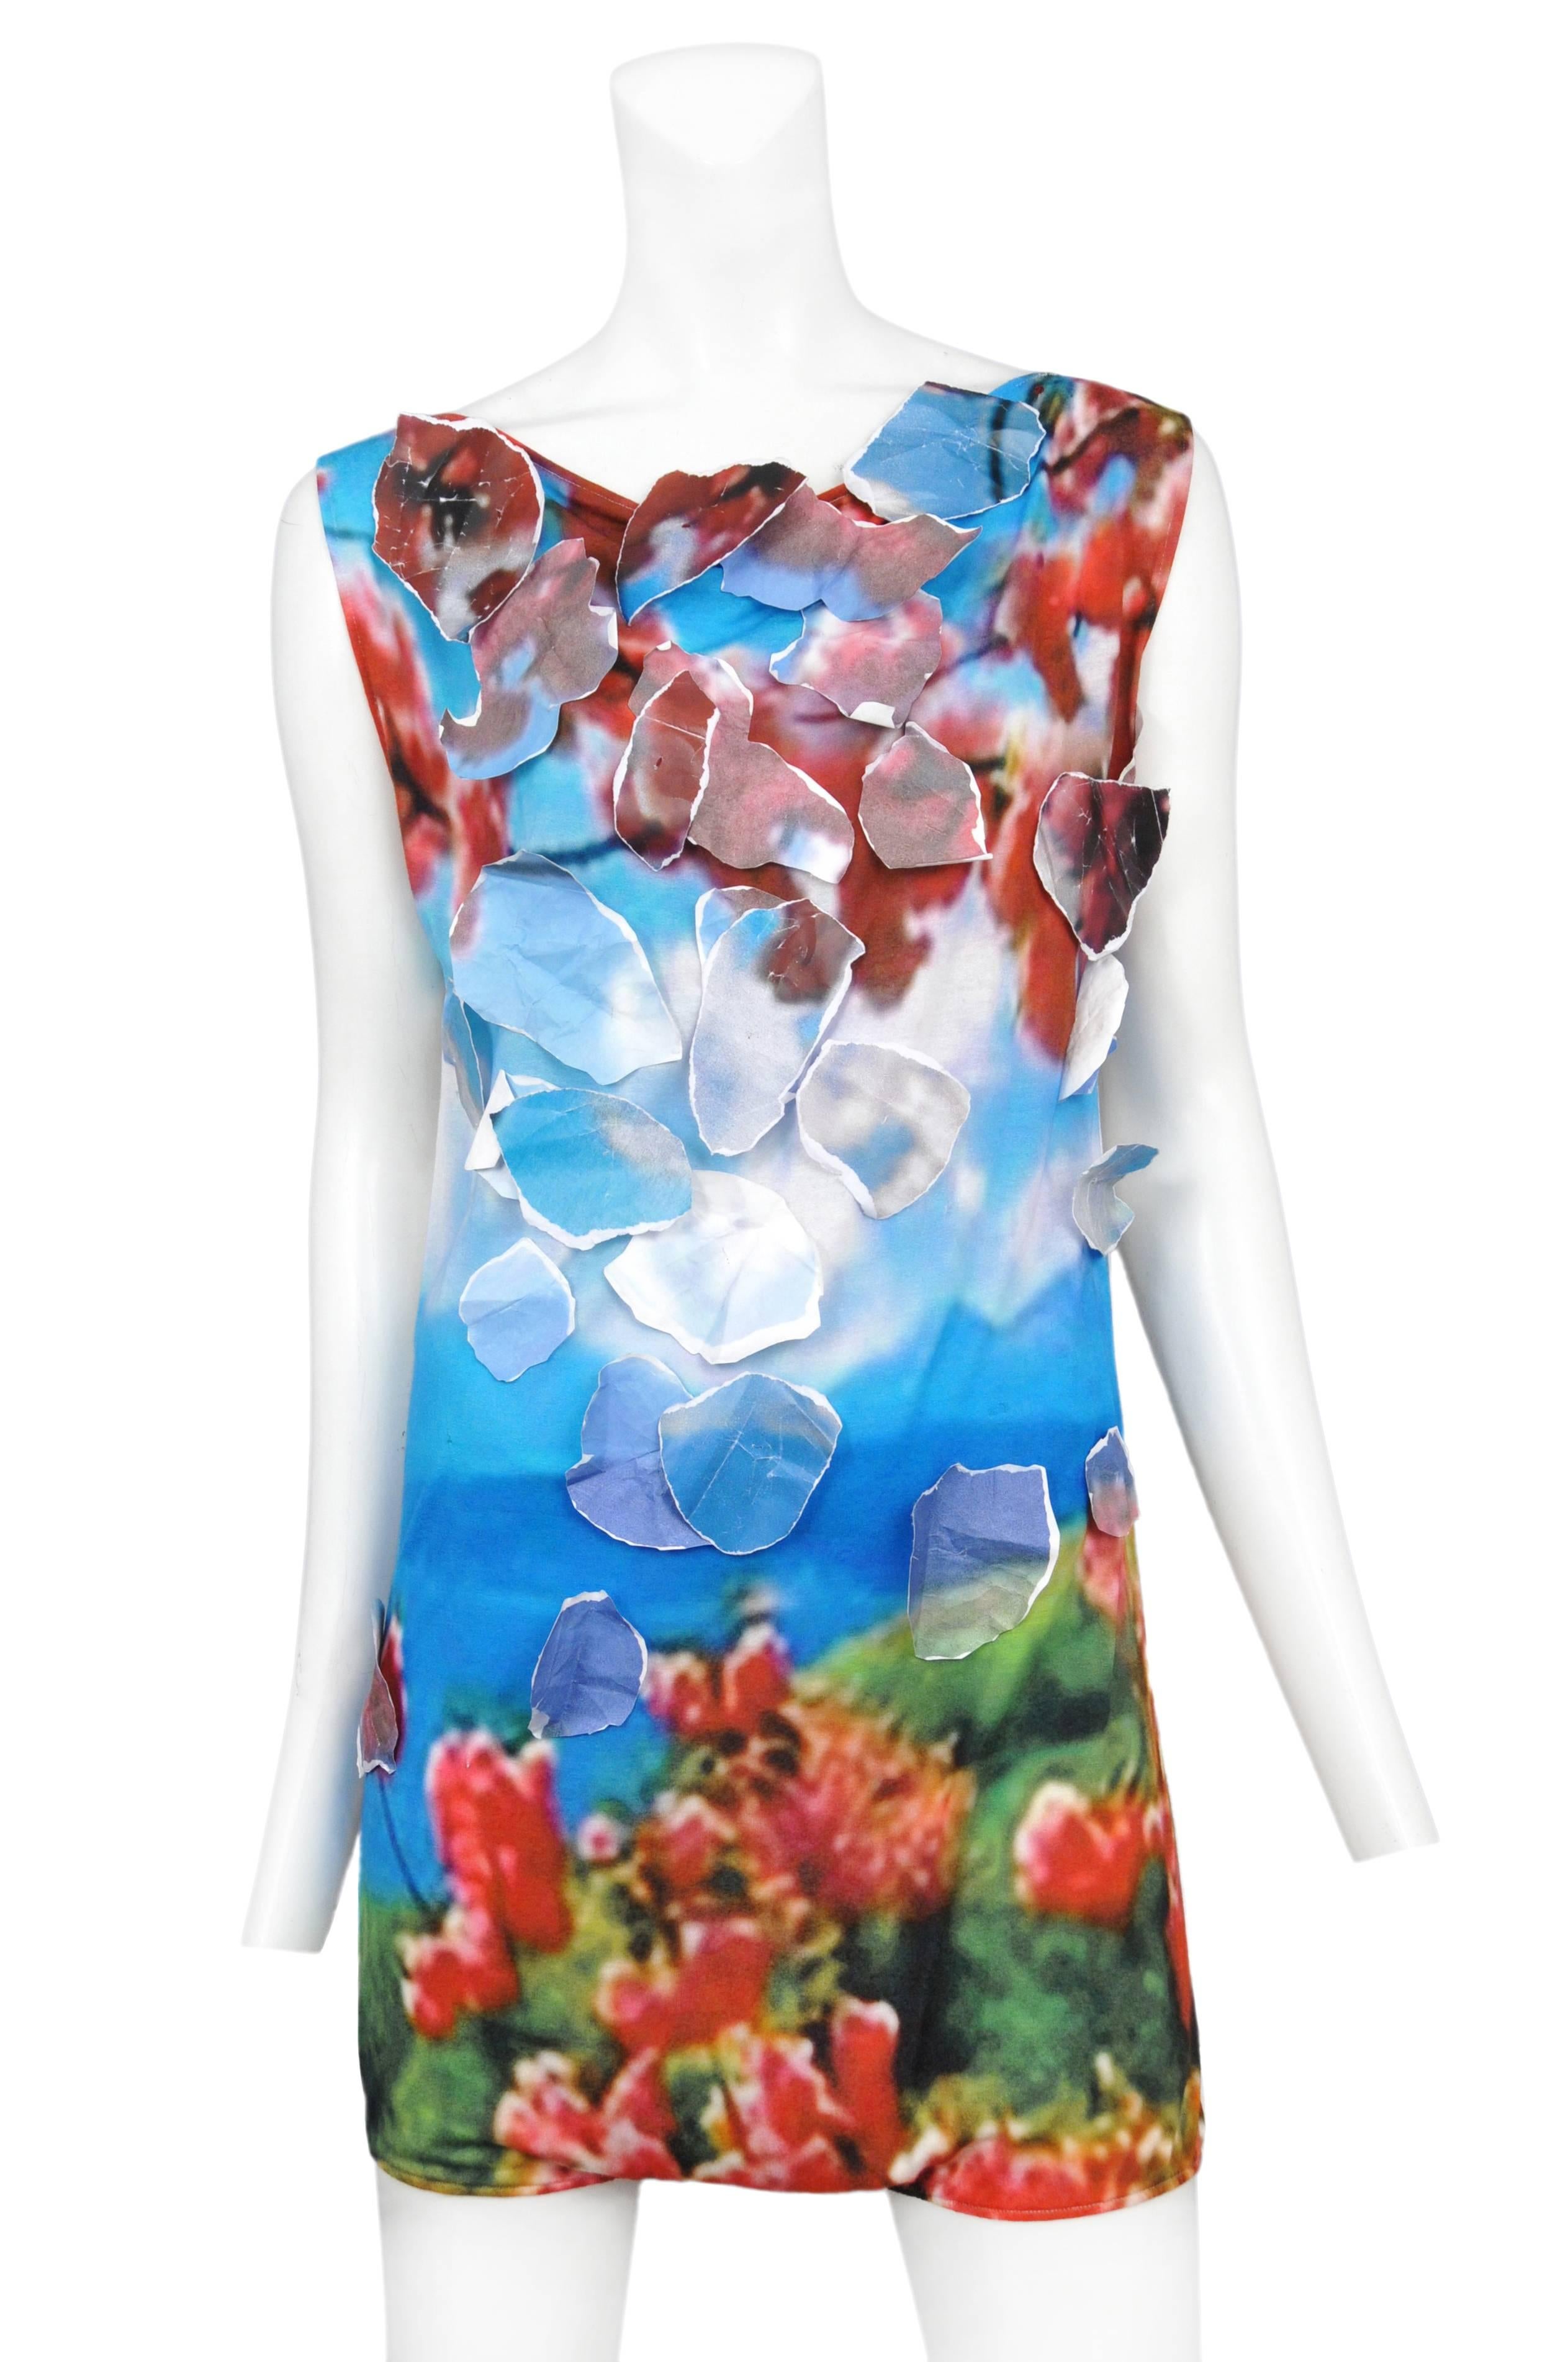 Vintage Maison Martin Margiela romper featuring an allover print of a sky lit garden and adorned with paper pieces that blend into the background. Circa Spring / Summer 2010.
Please inquire for additional images.